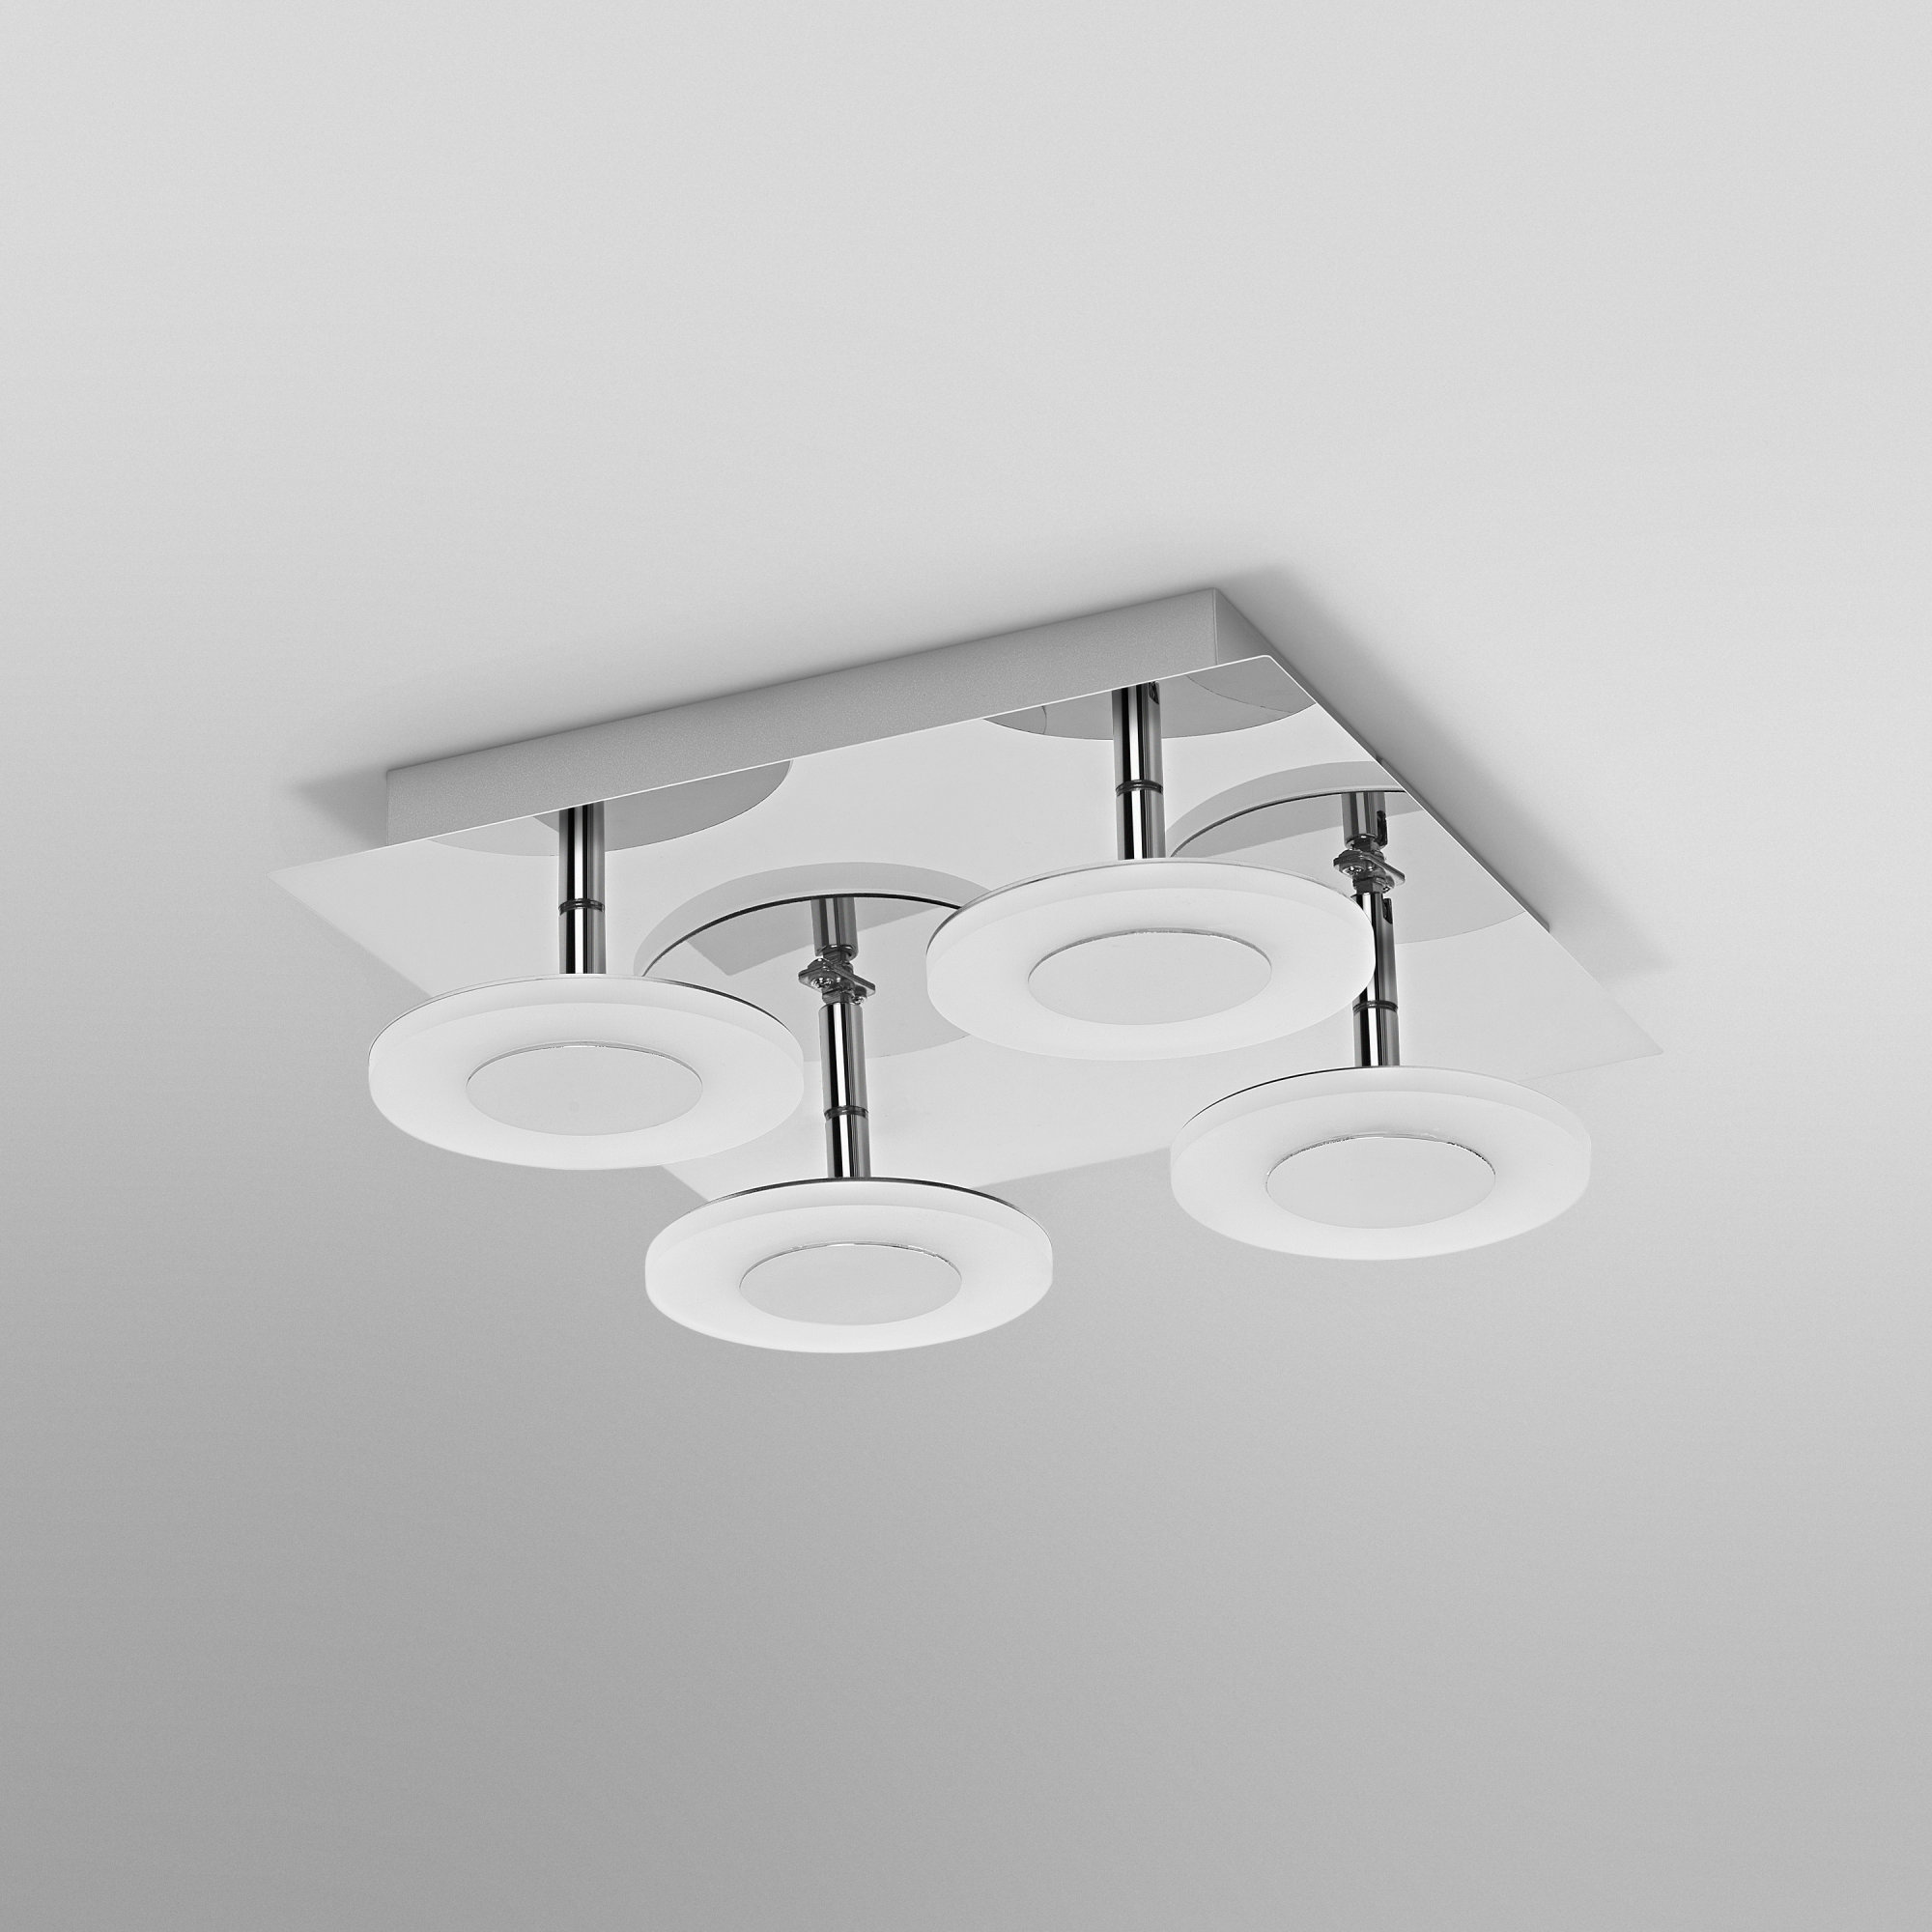 LEDVANCE SMART+ WiFi Tunable White LED Ceiling Light ORBIS Wave 300x300mm IP44 silver 2800lm